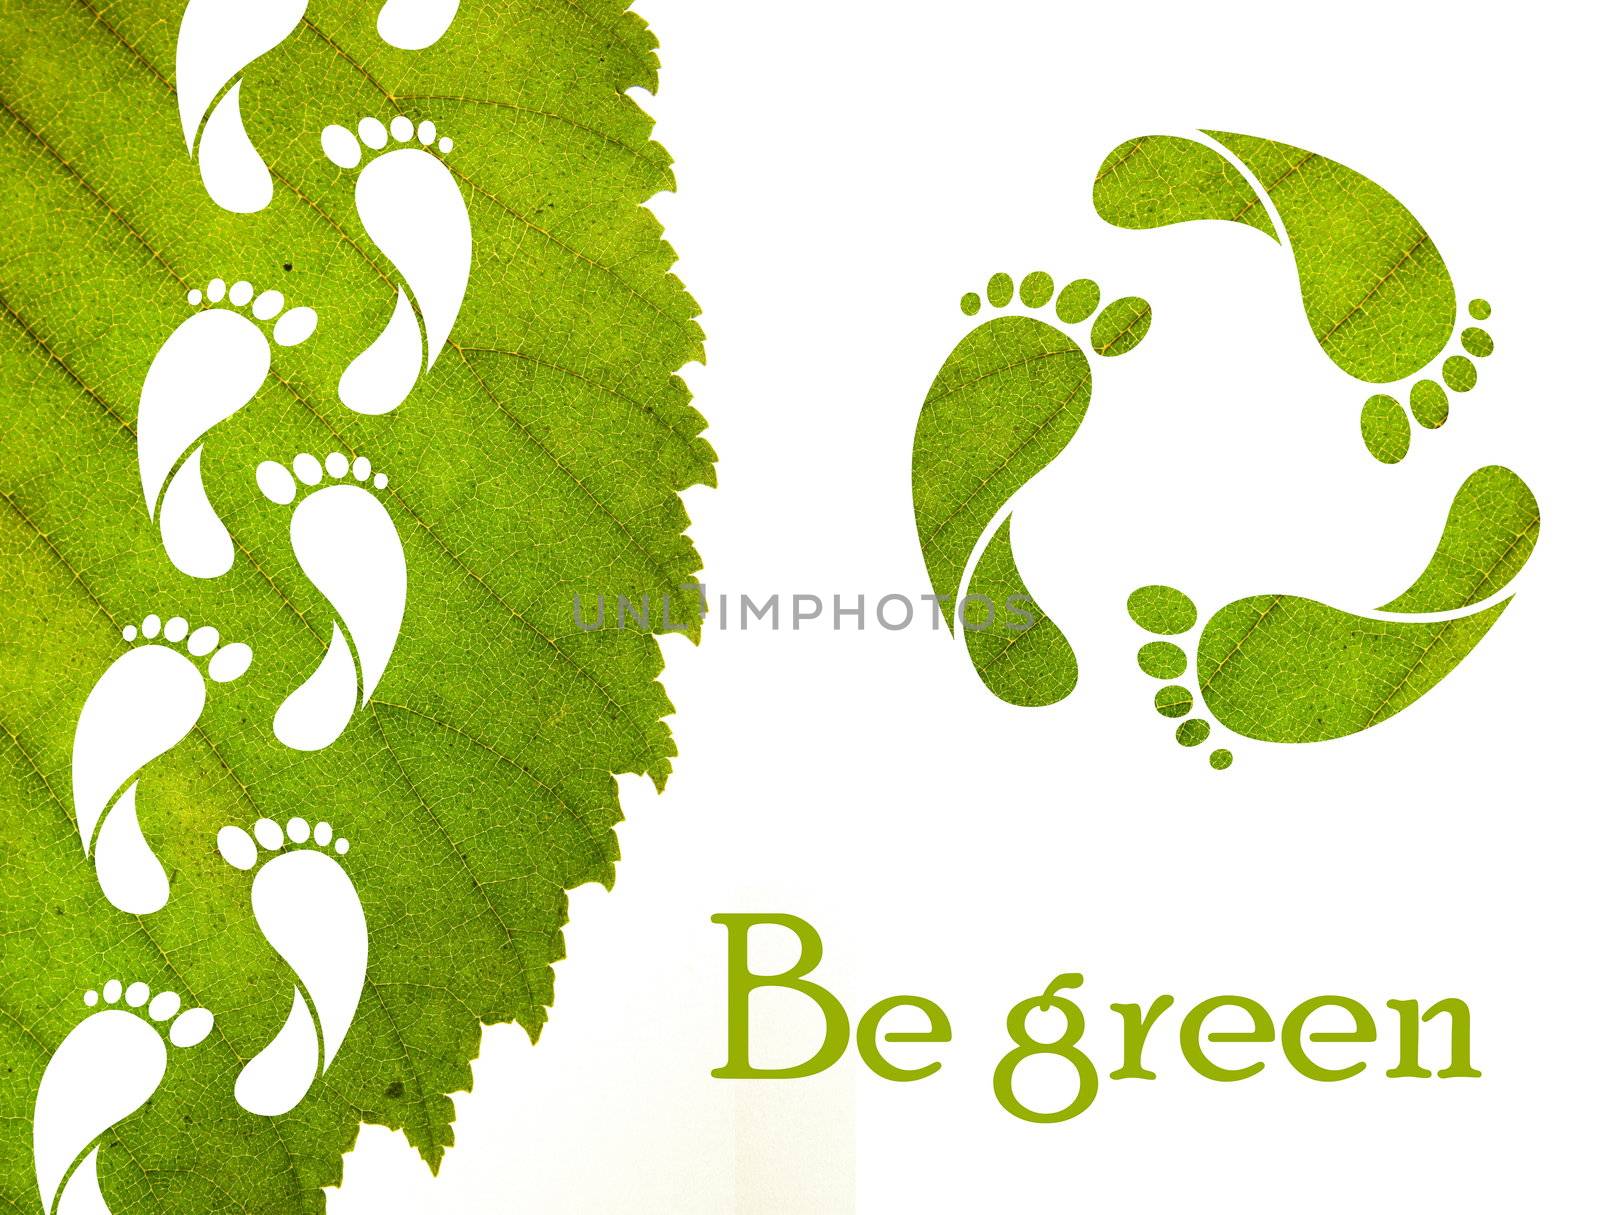 Footprint recycle sign and green leaf by Arsen